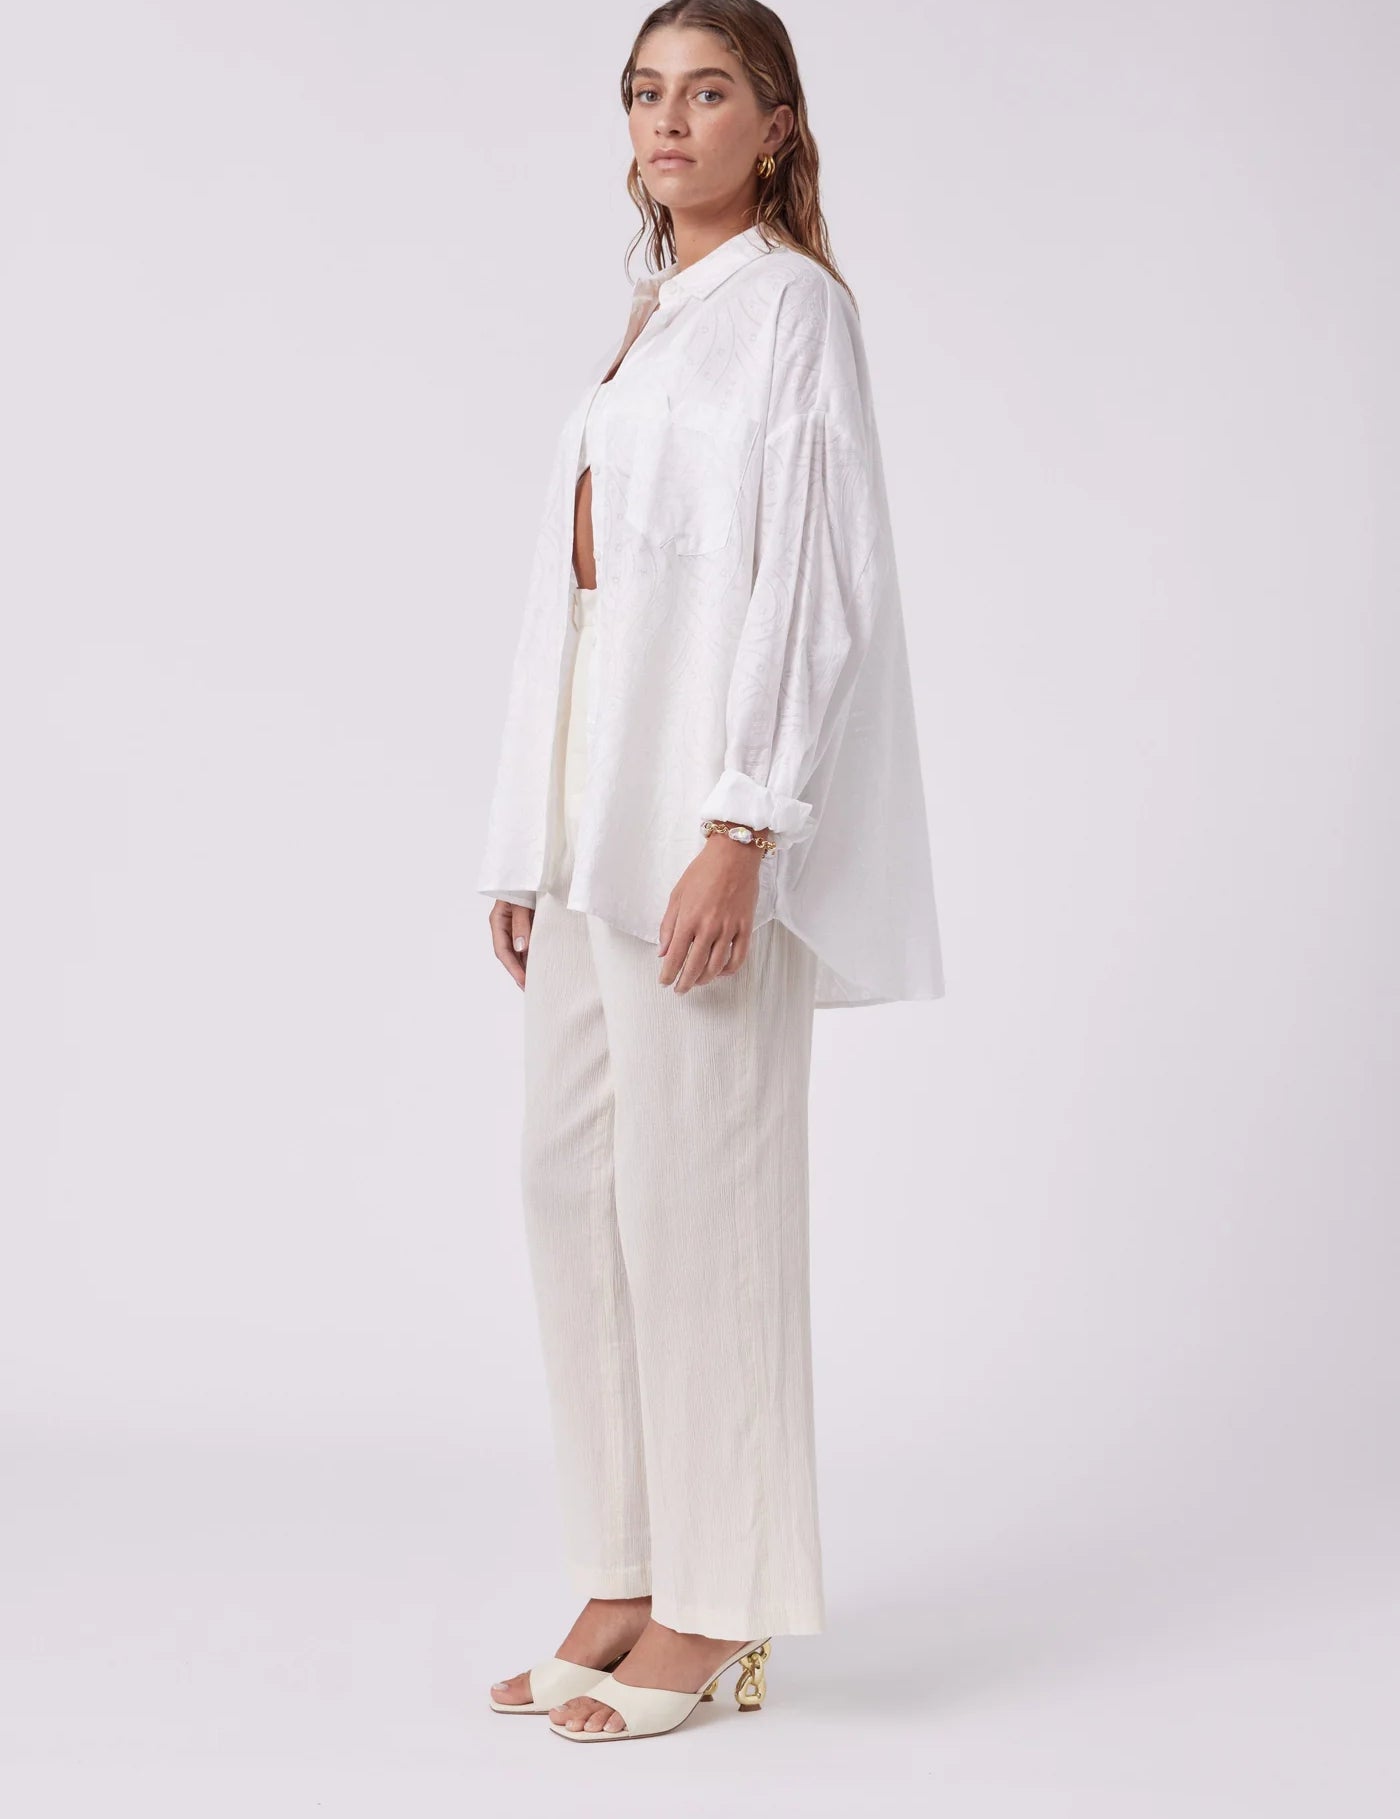 mnk-atelier-tops-one-size-white-nonchalant-shirt-white-broderie-anglaise-40507153809685_1400x_c4d17101-dc21-48cf-9ab6-4dd950f37a25.webp